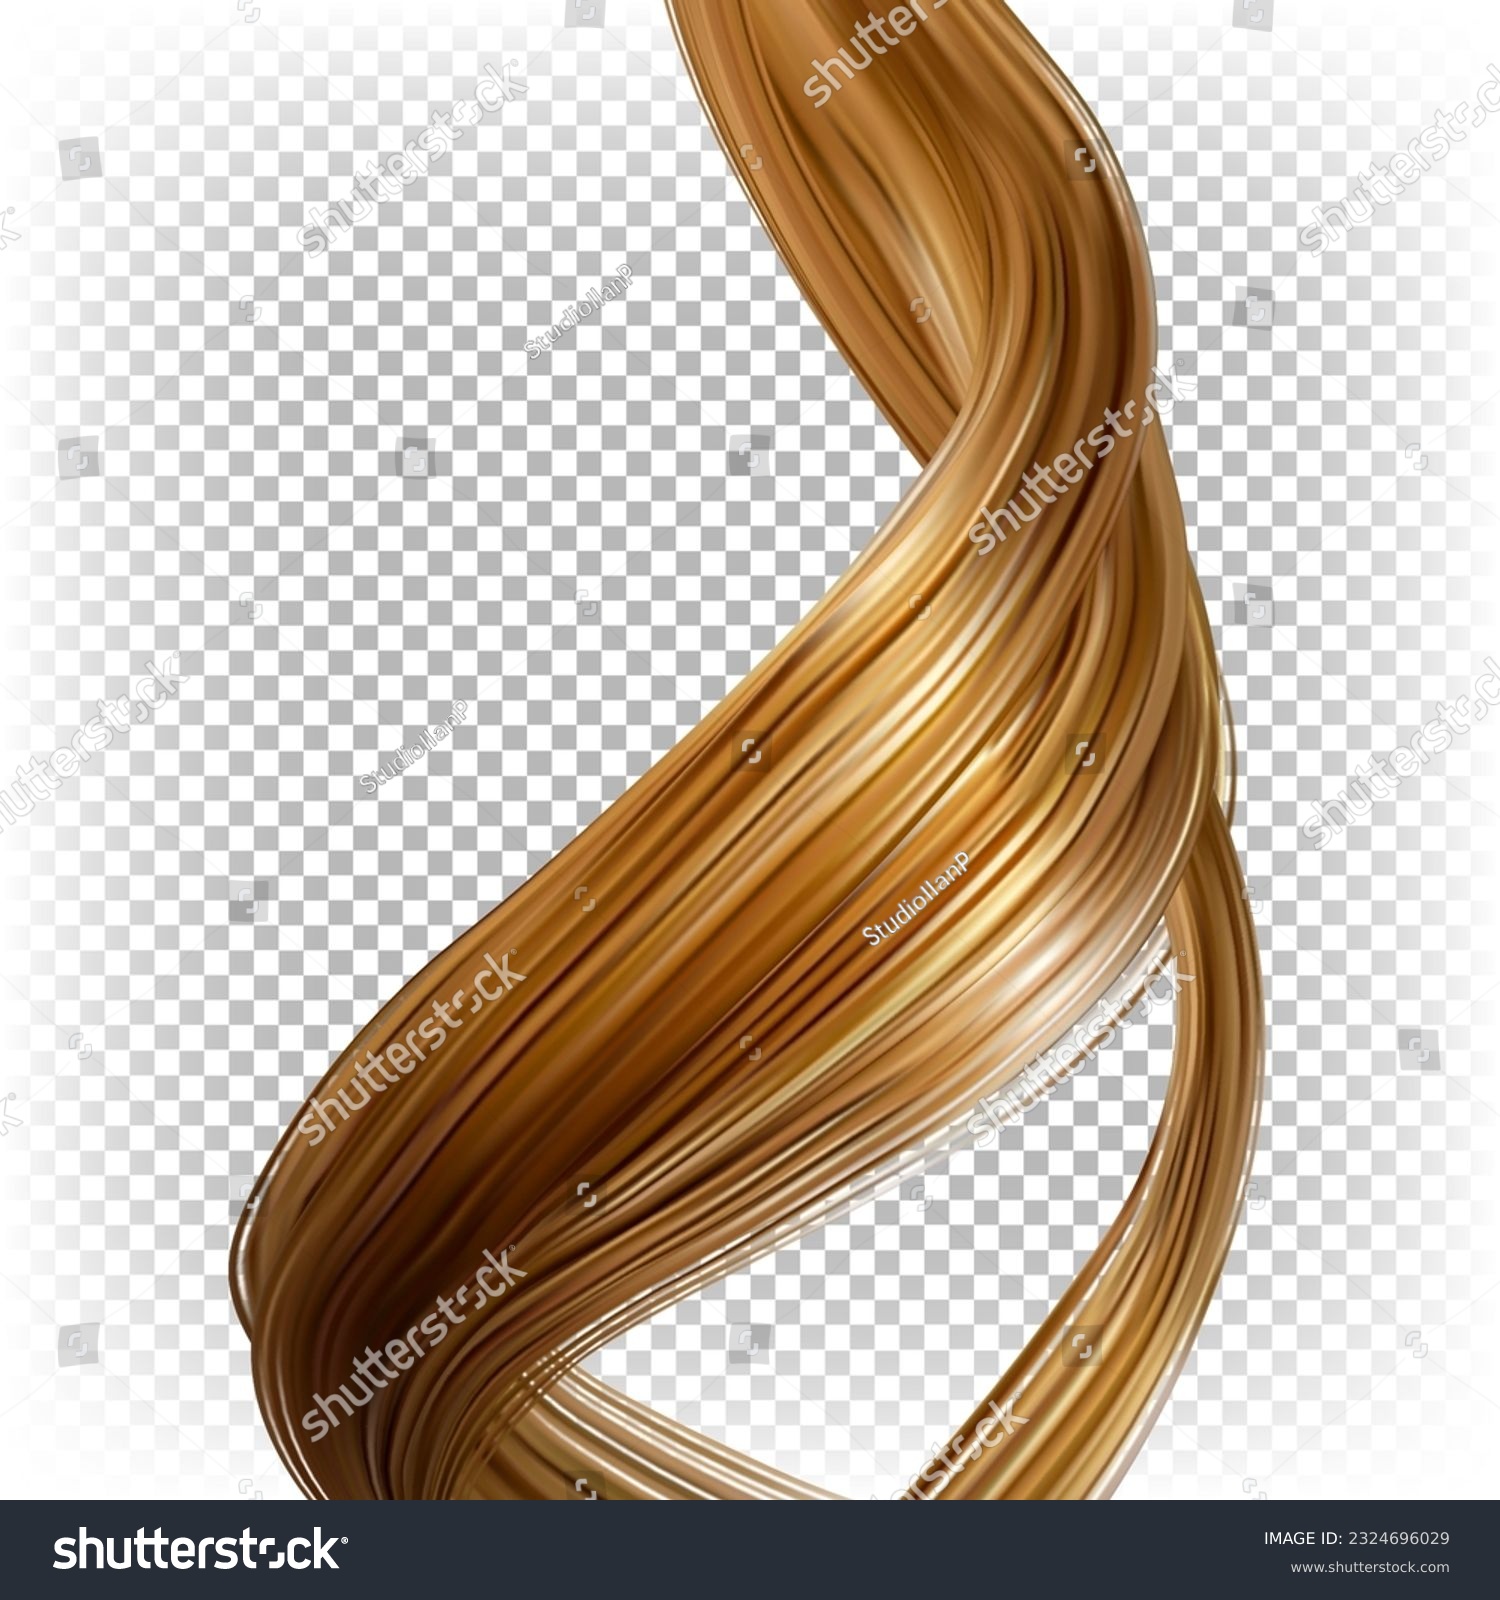 Strand of wavy female blond shiny hair isolated on transparent background. Vector realistic illustration. #2324696029